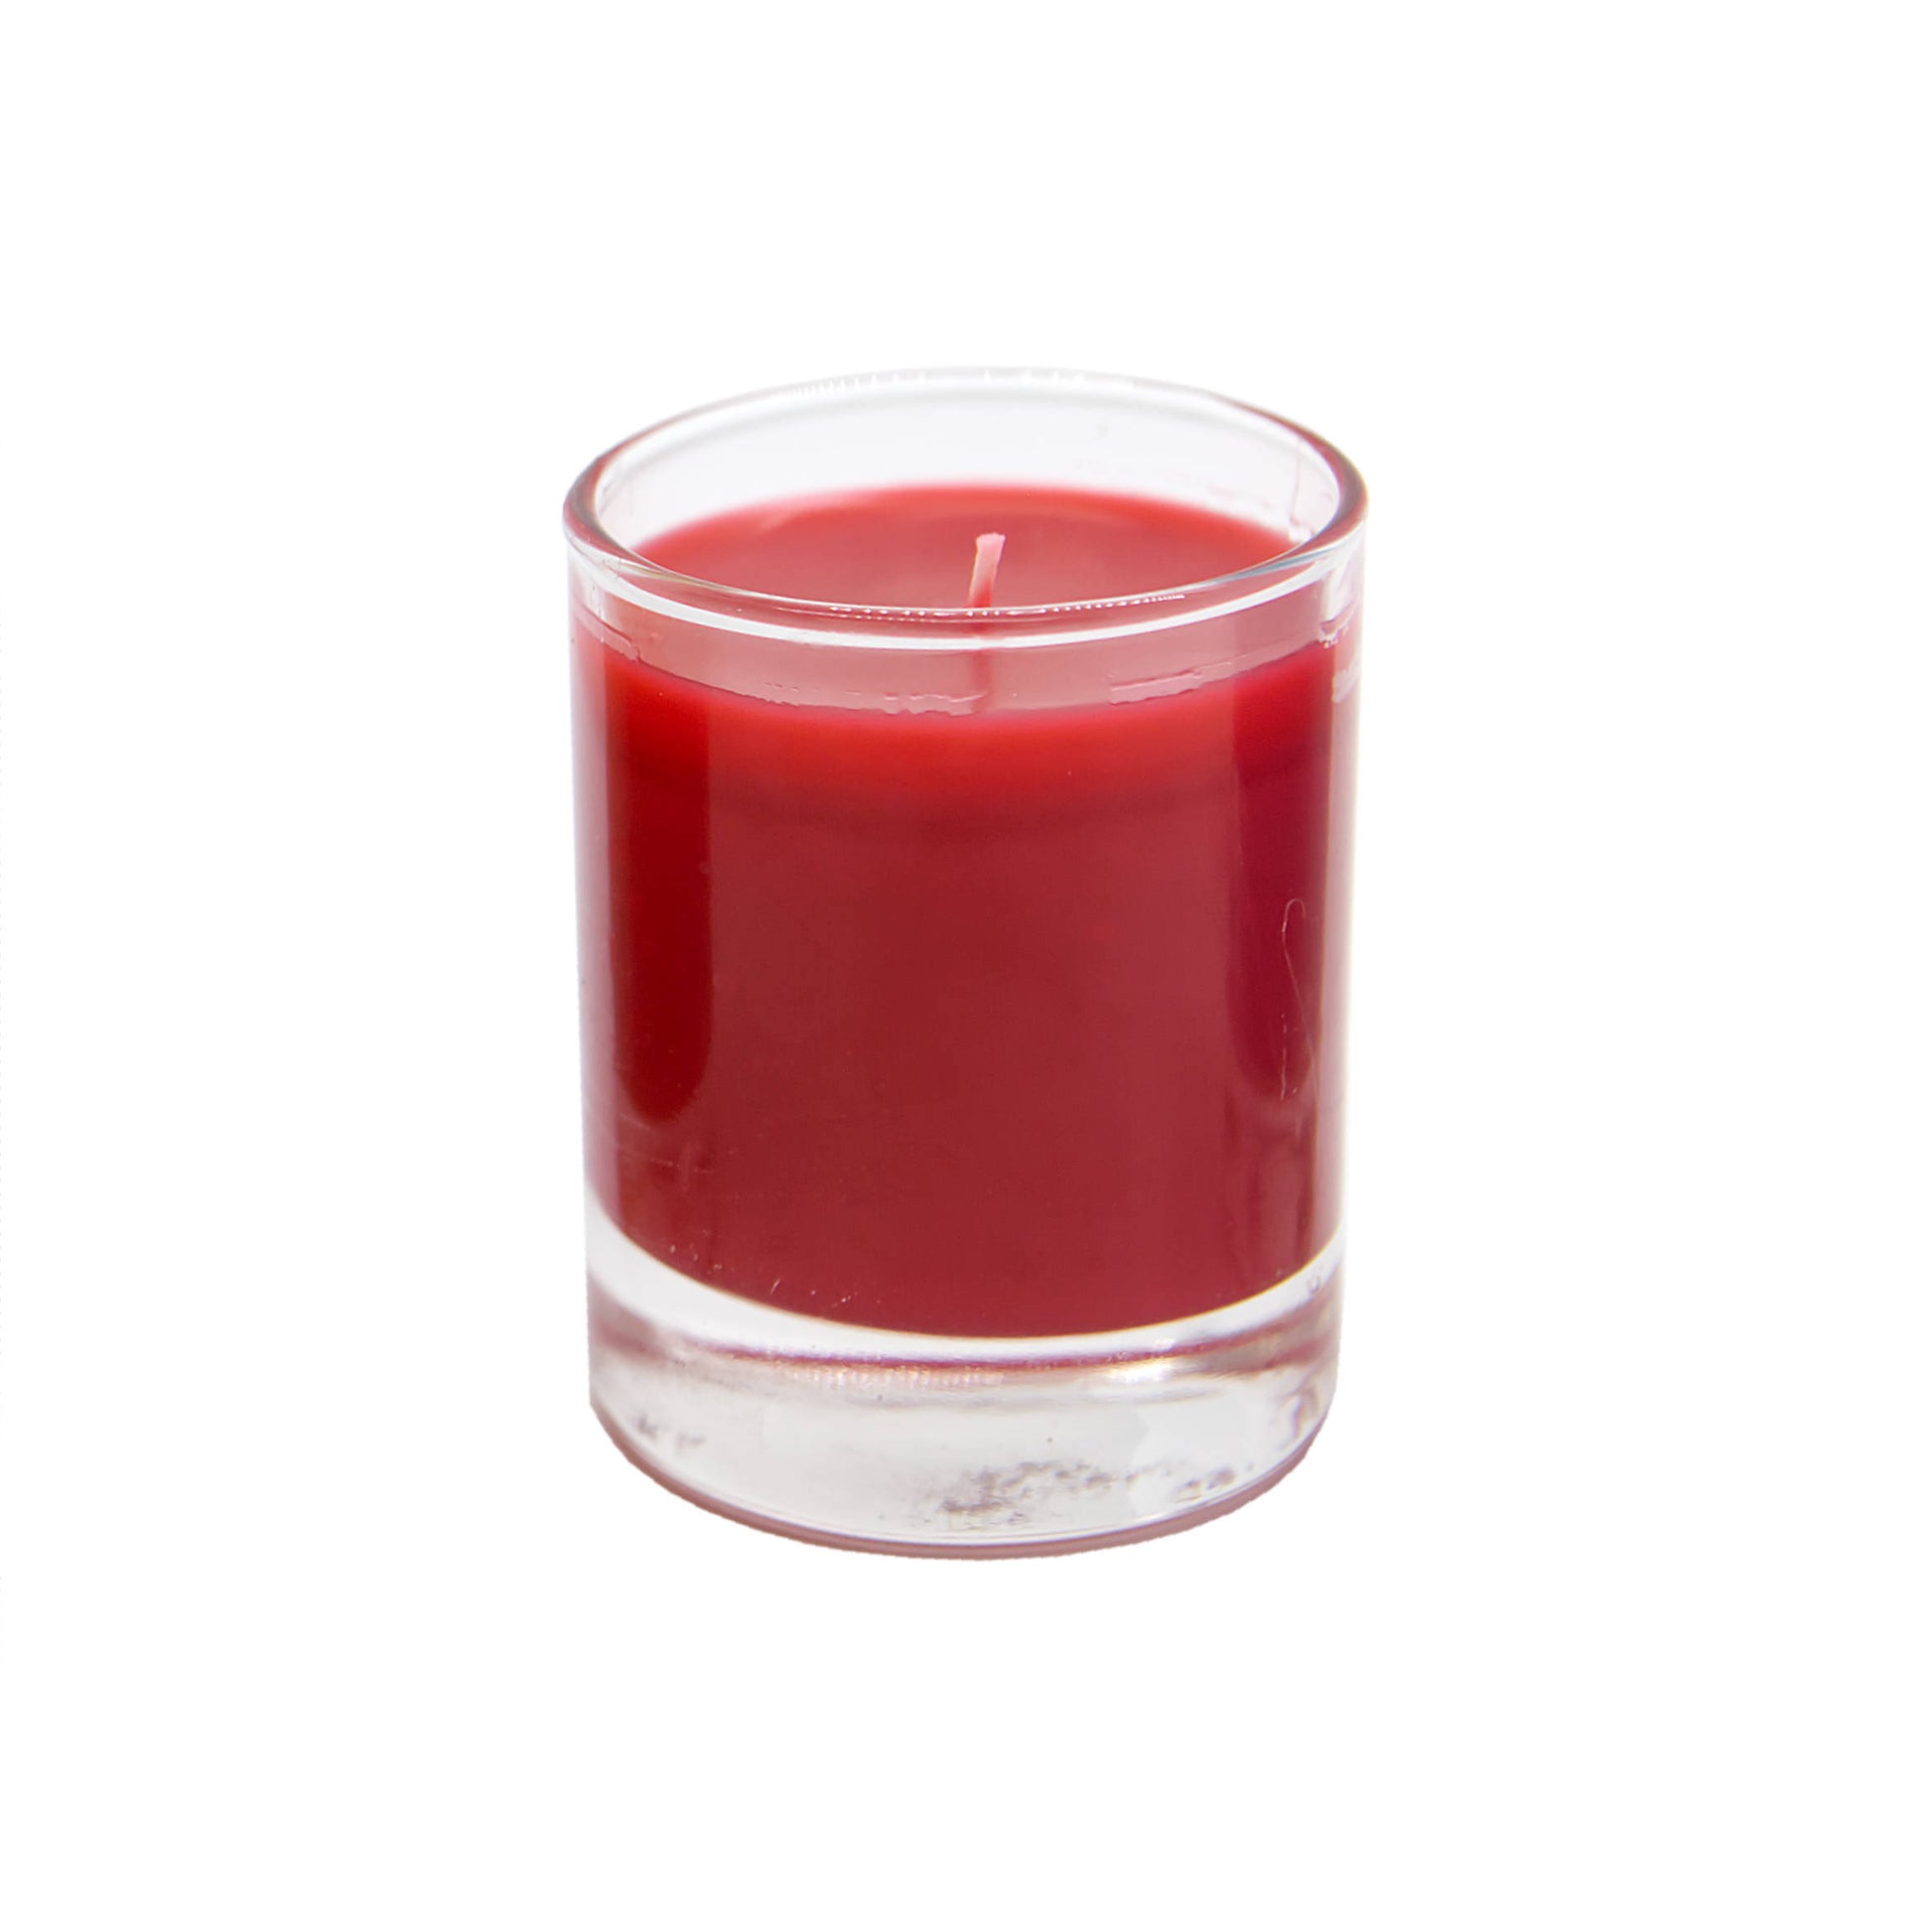 Red Rose Votives Scented Candle